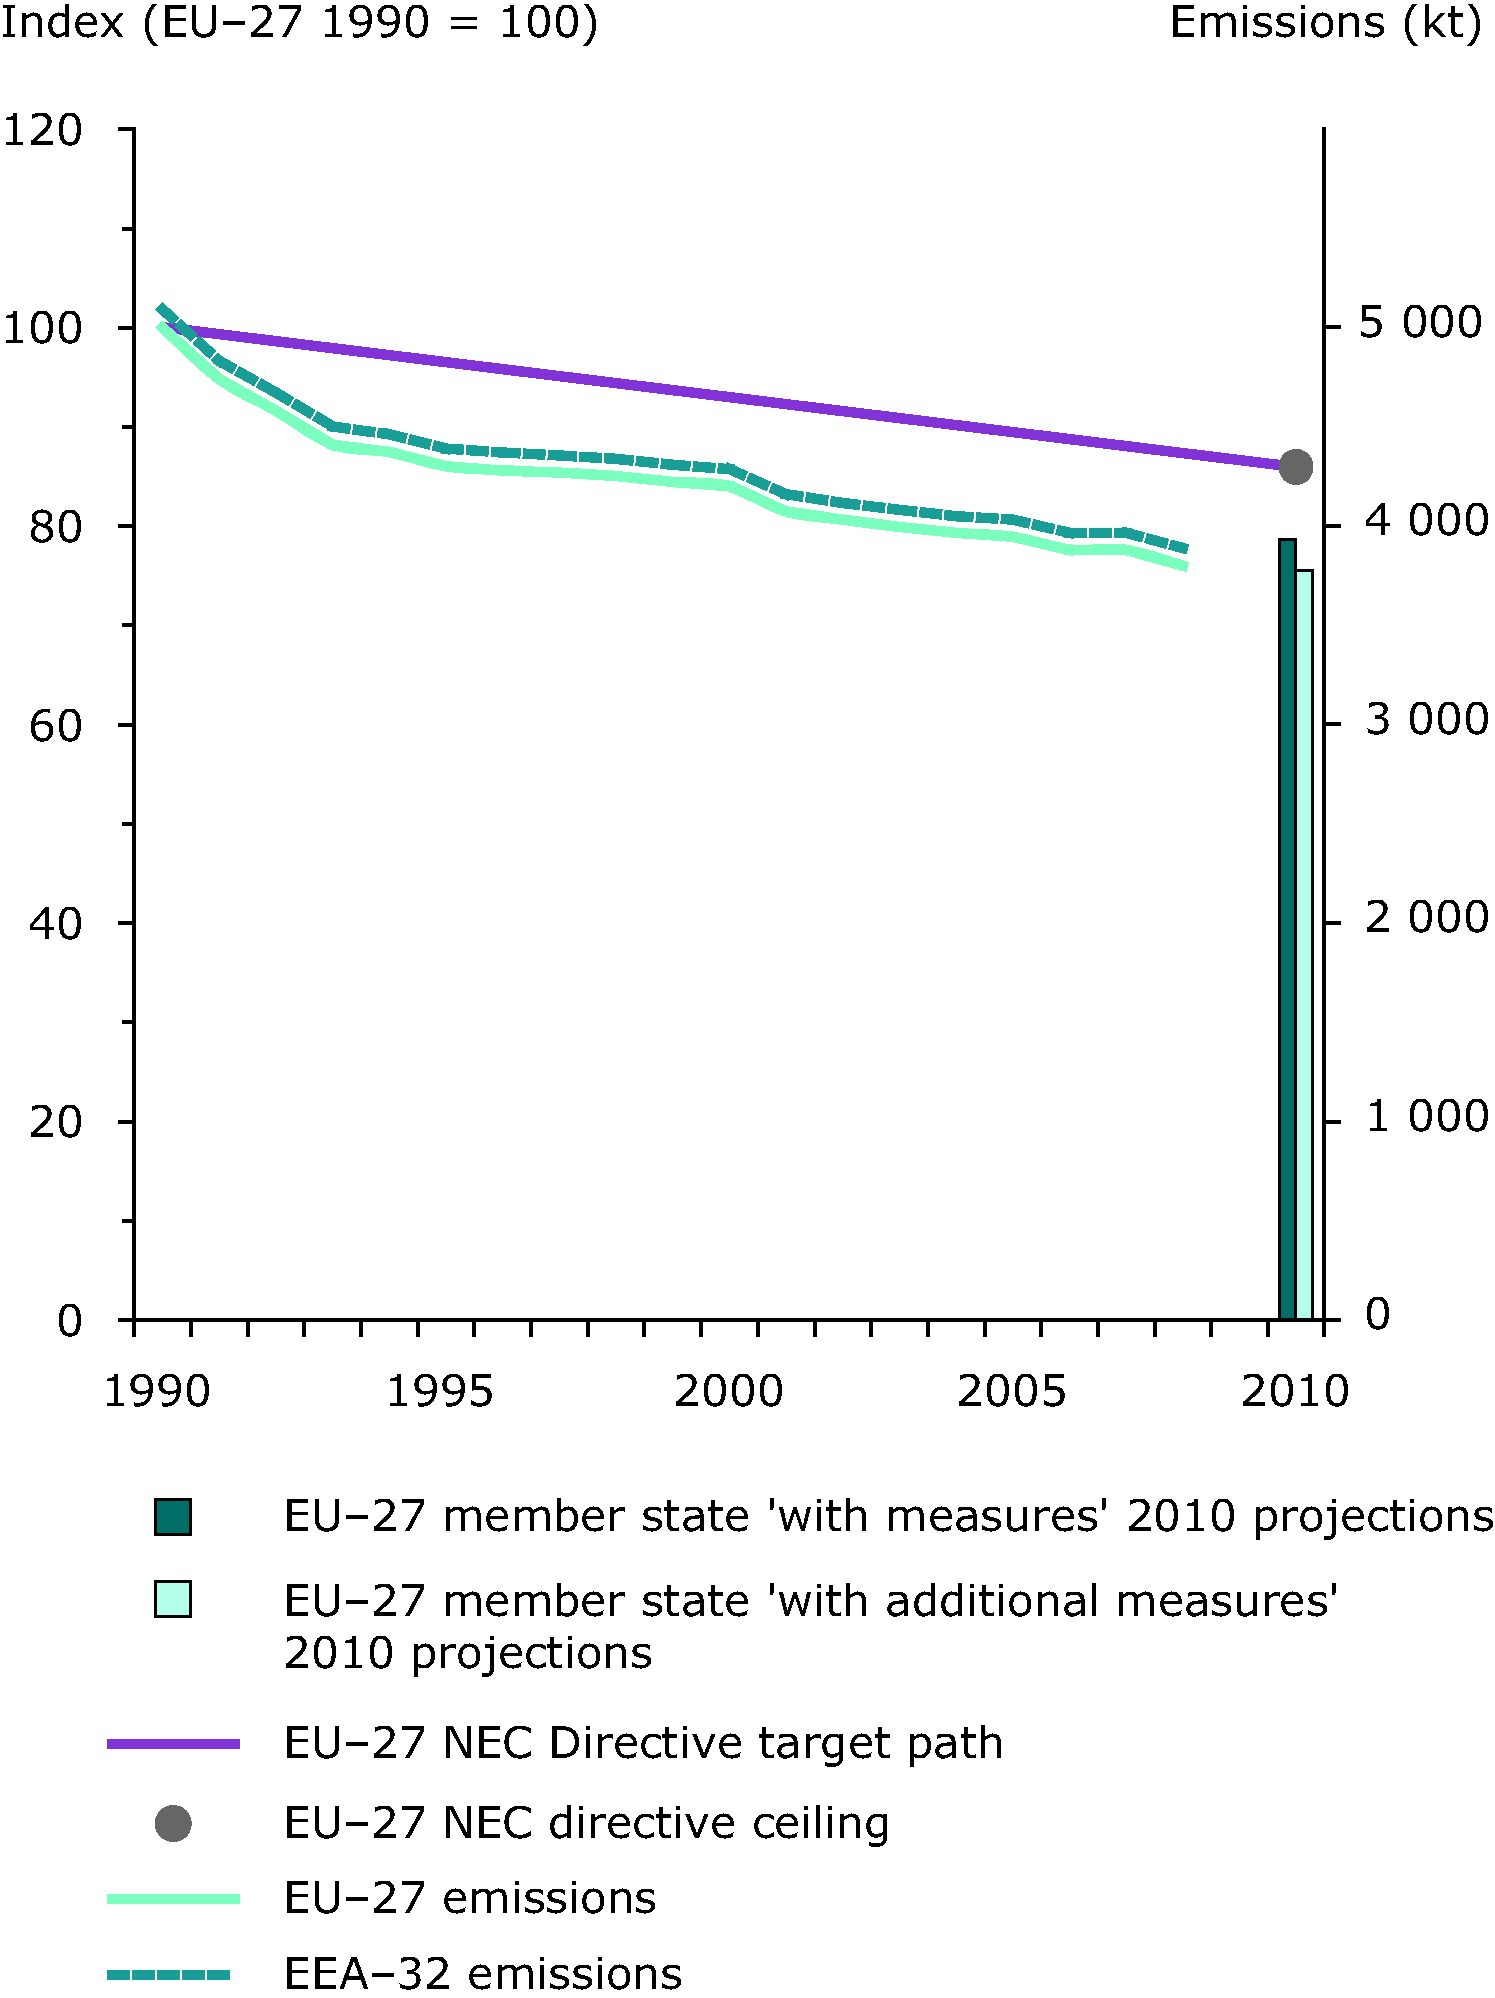 Emission trends of ammonia (EEA member countries, EU-27 Member States)